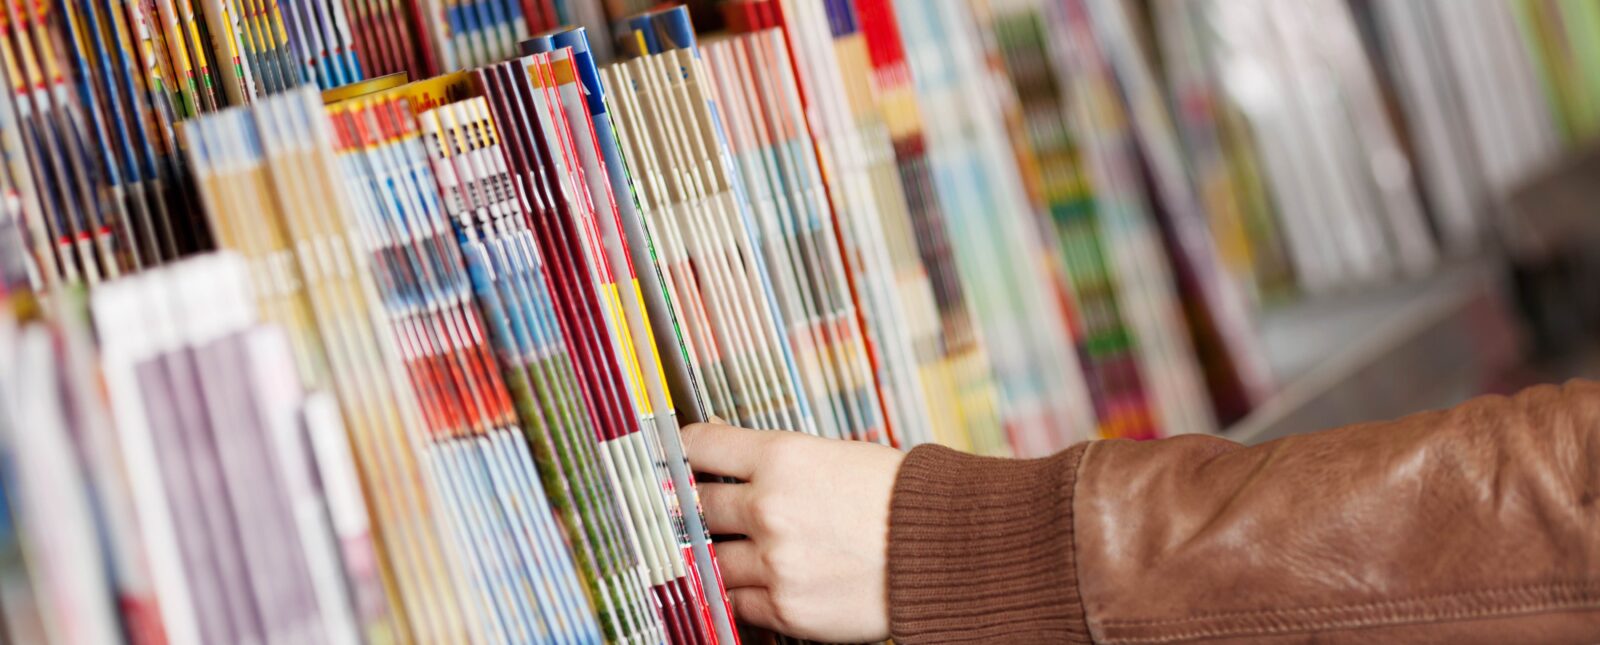 Closeup of woman's hands choosing magazines from shelf in supermarket